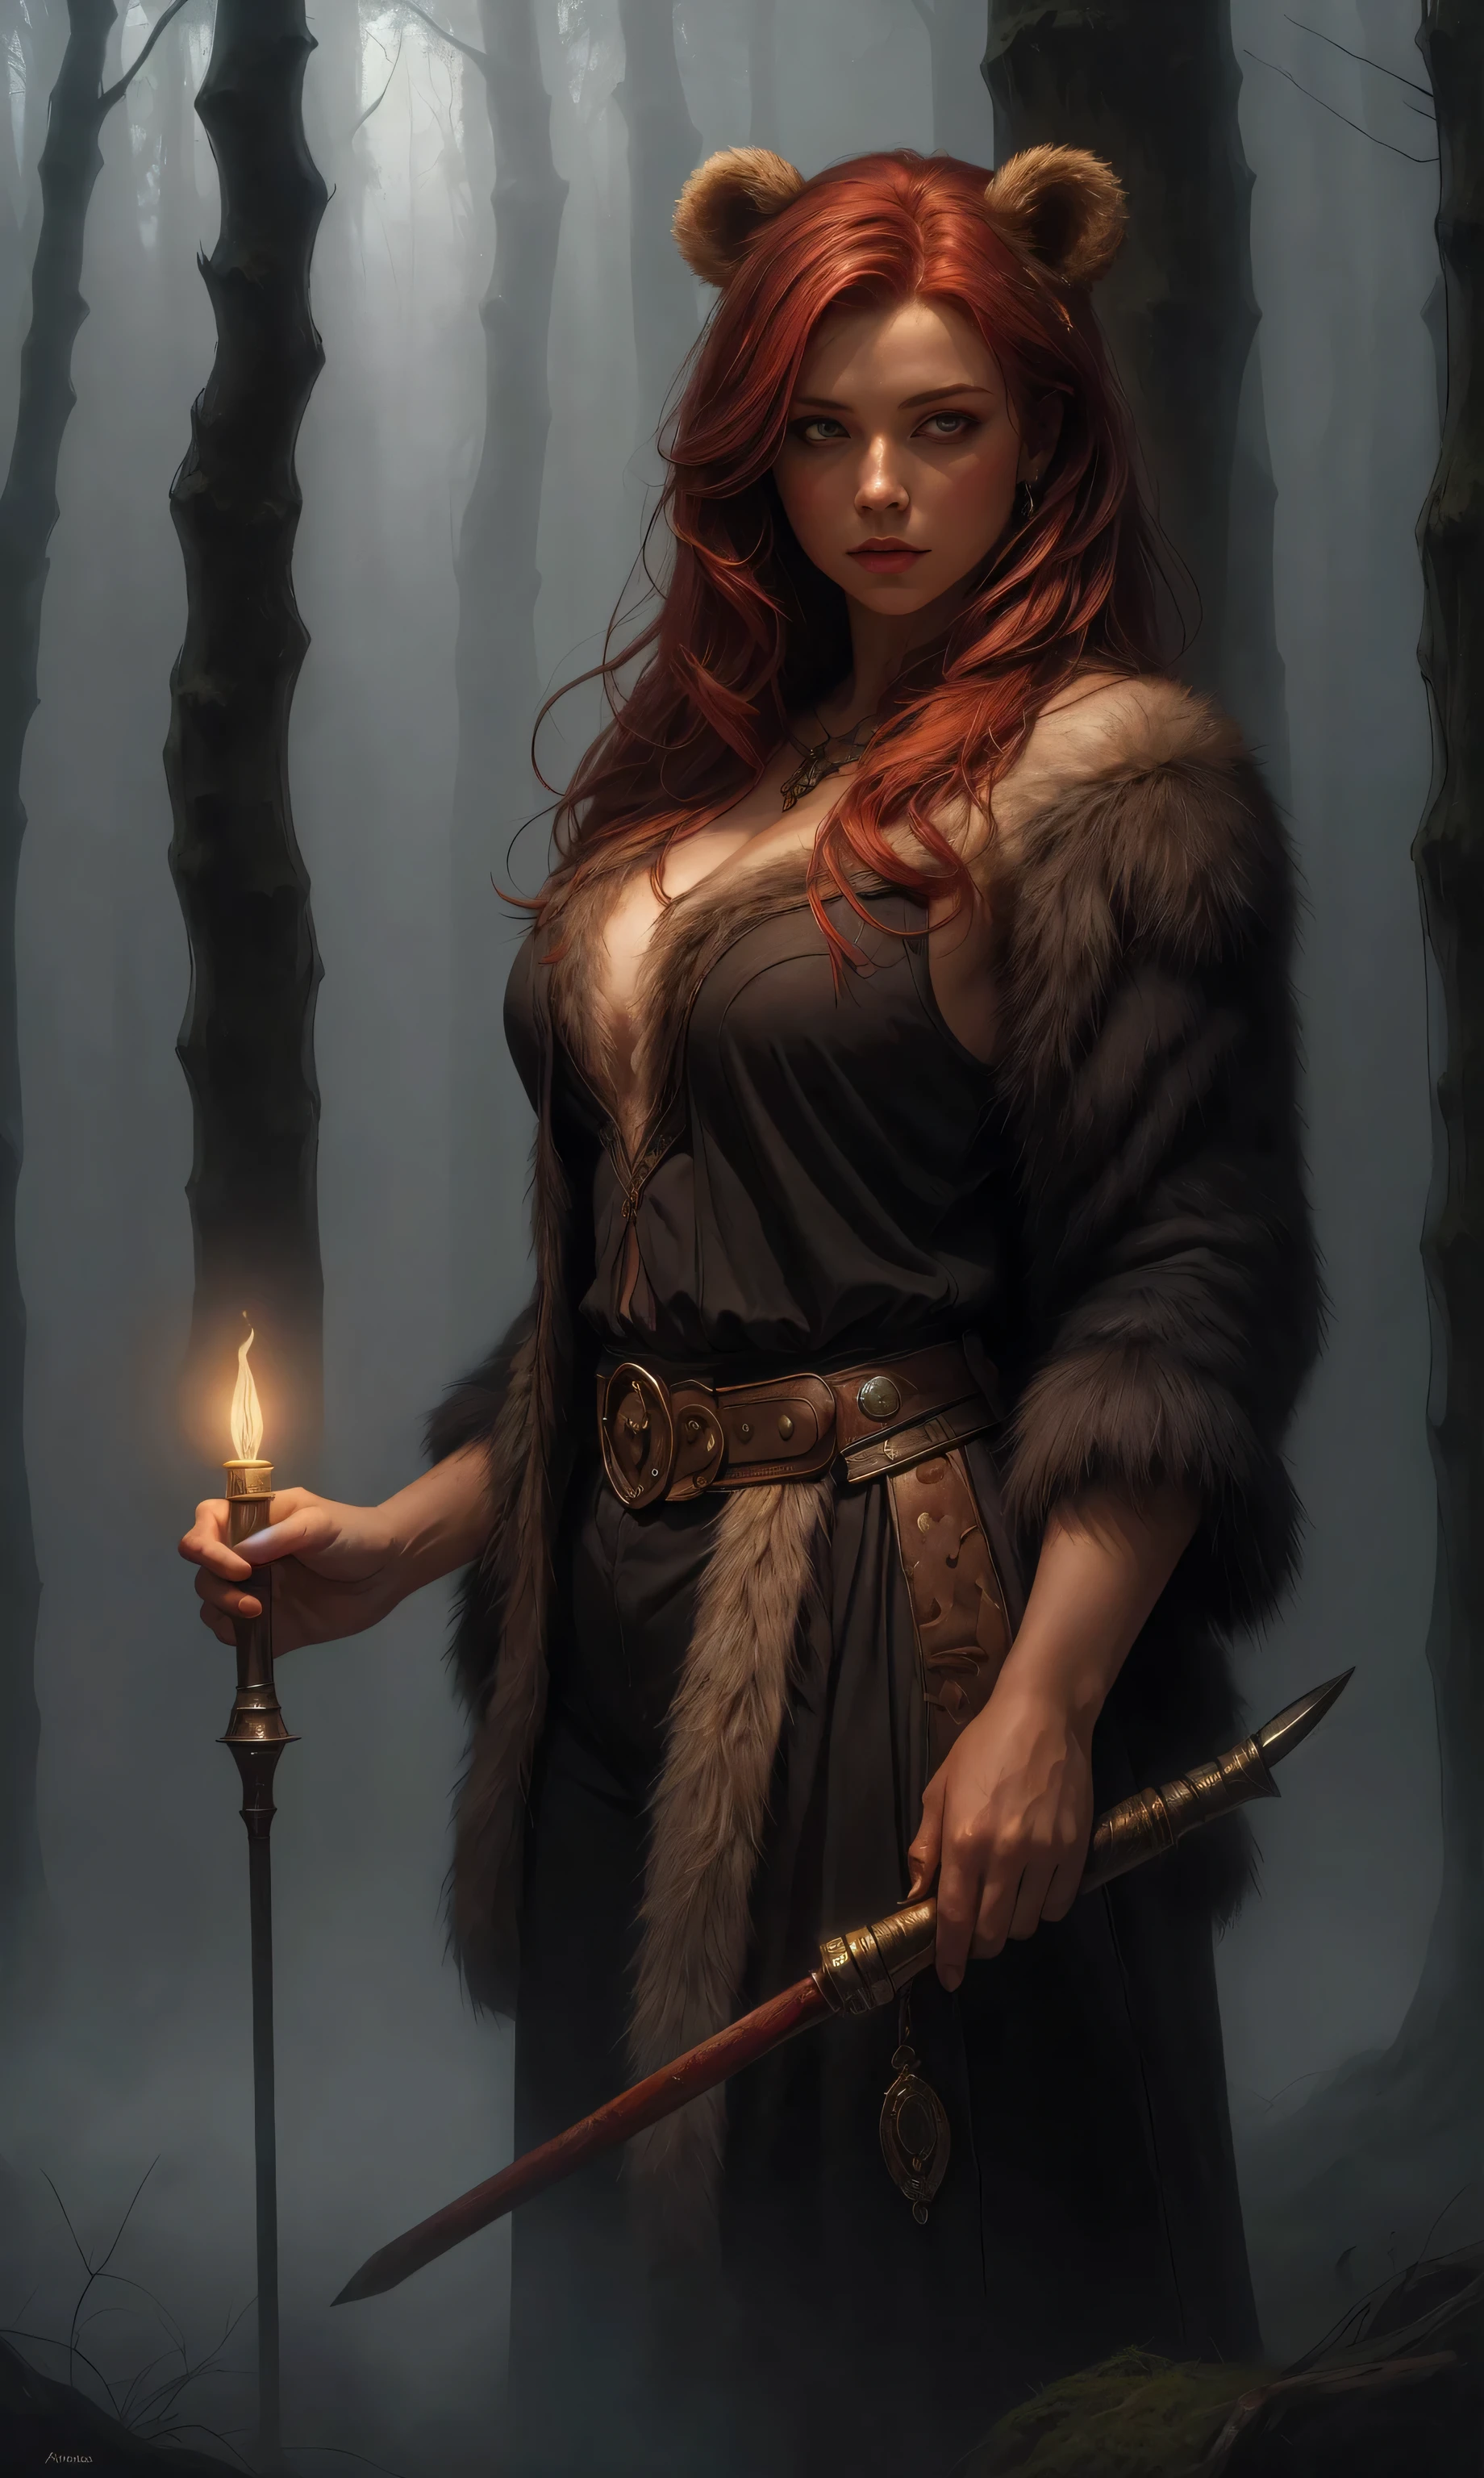 Sinthpaint, advdnd2023, novel illustration, intricate art, 1girl, female, a woman, redhead, wearing a bear skin, positioned in a dense forest, glowing red eyes, holding a torch, gloomy atmosphere with fog, detailed painting style, realistic light and shadows, painting, open field